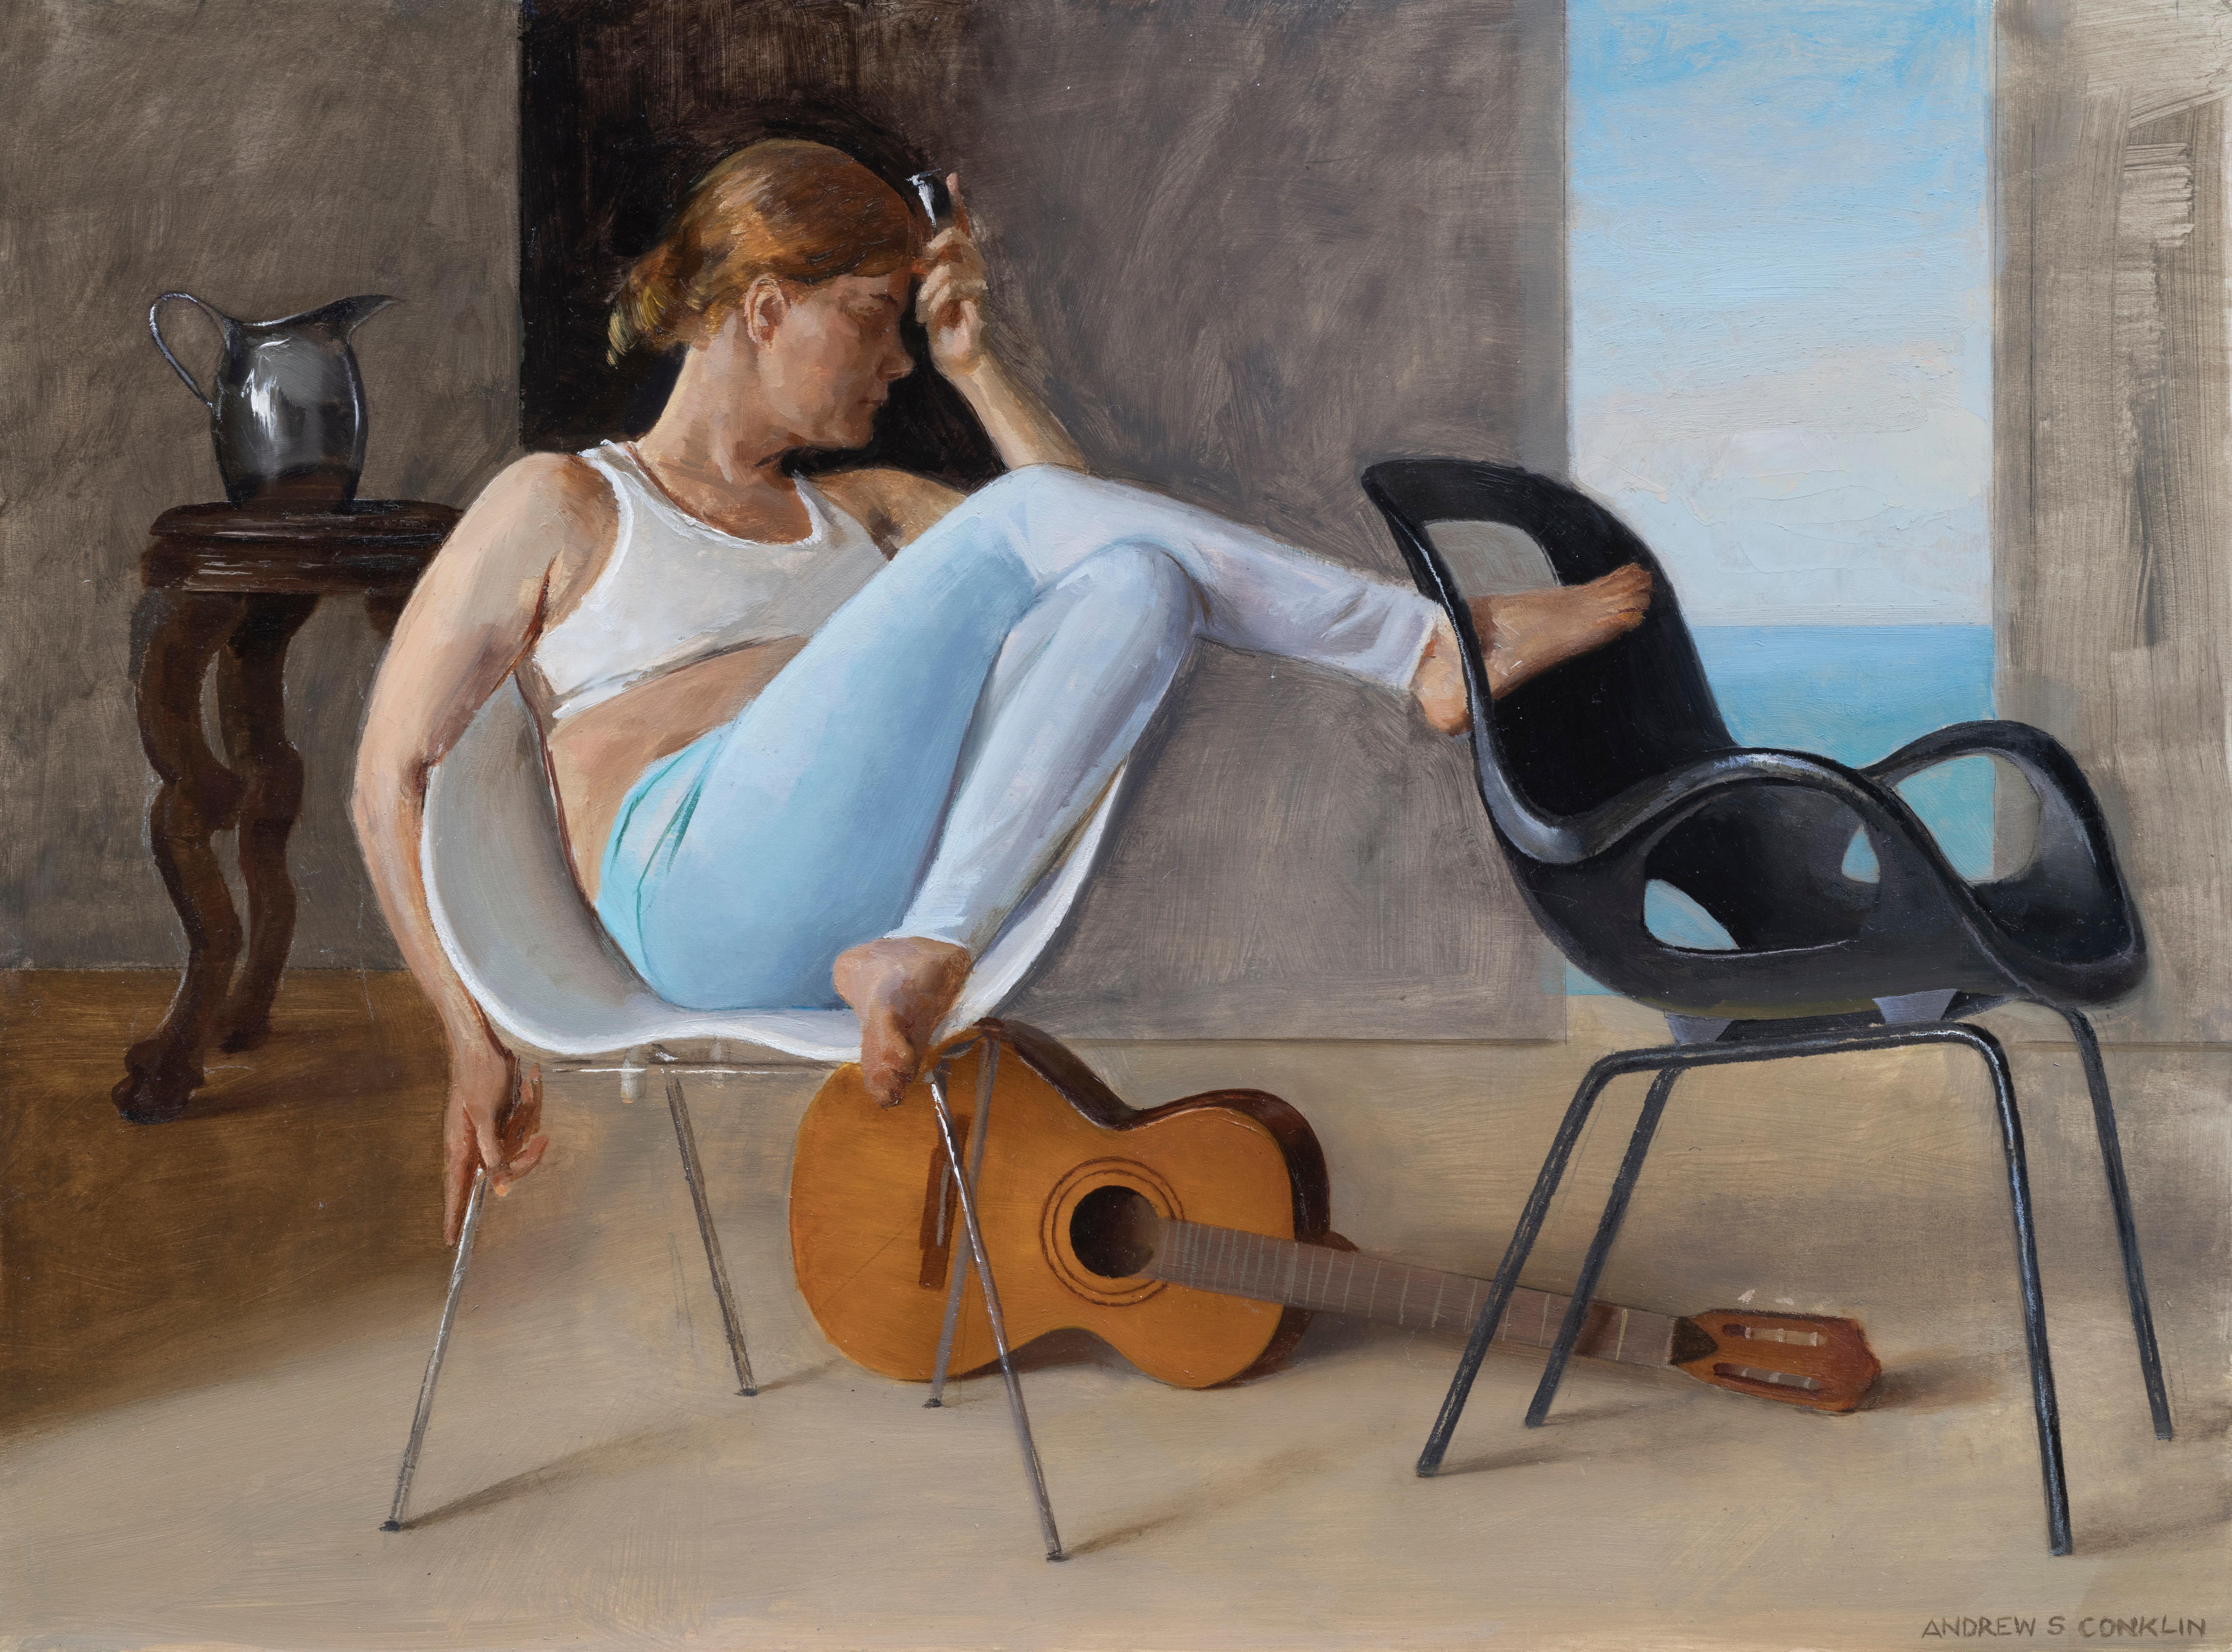 Ashley with Guitar, Female Lounging on a Tom Vac Chair, Original Oil on Panel